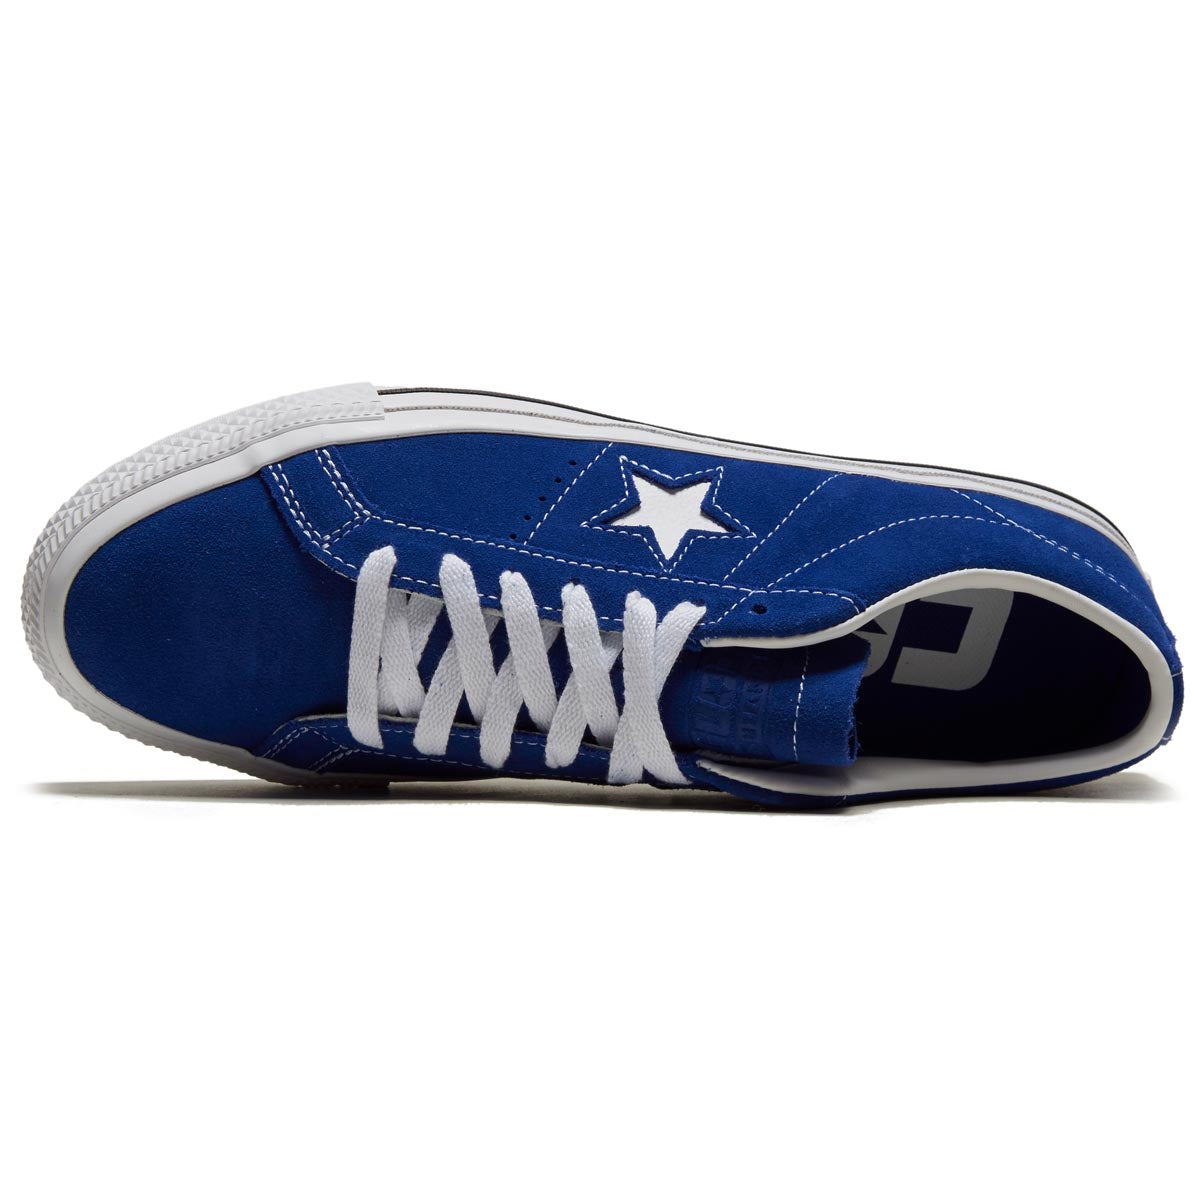 Converse One Star Pro Ox Shoes - Blue/White/Black image 3